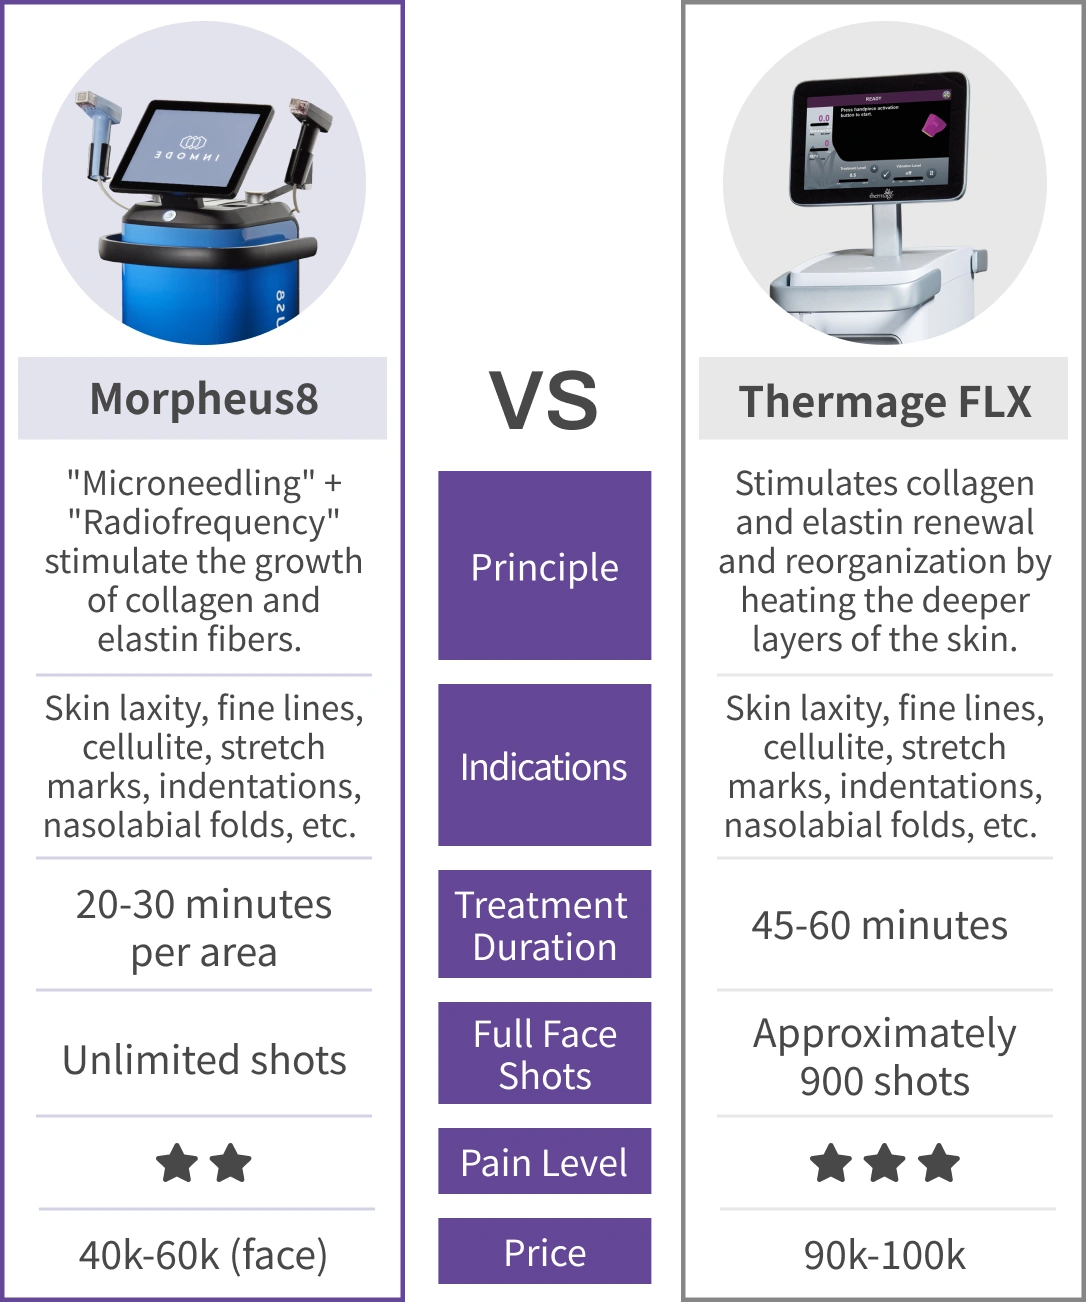 Morpheus8 vs Thermage FLX Chart-Principle、Indications、Treatment Duration、Full Face Shots、Pain Level、Price